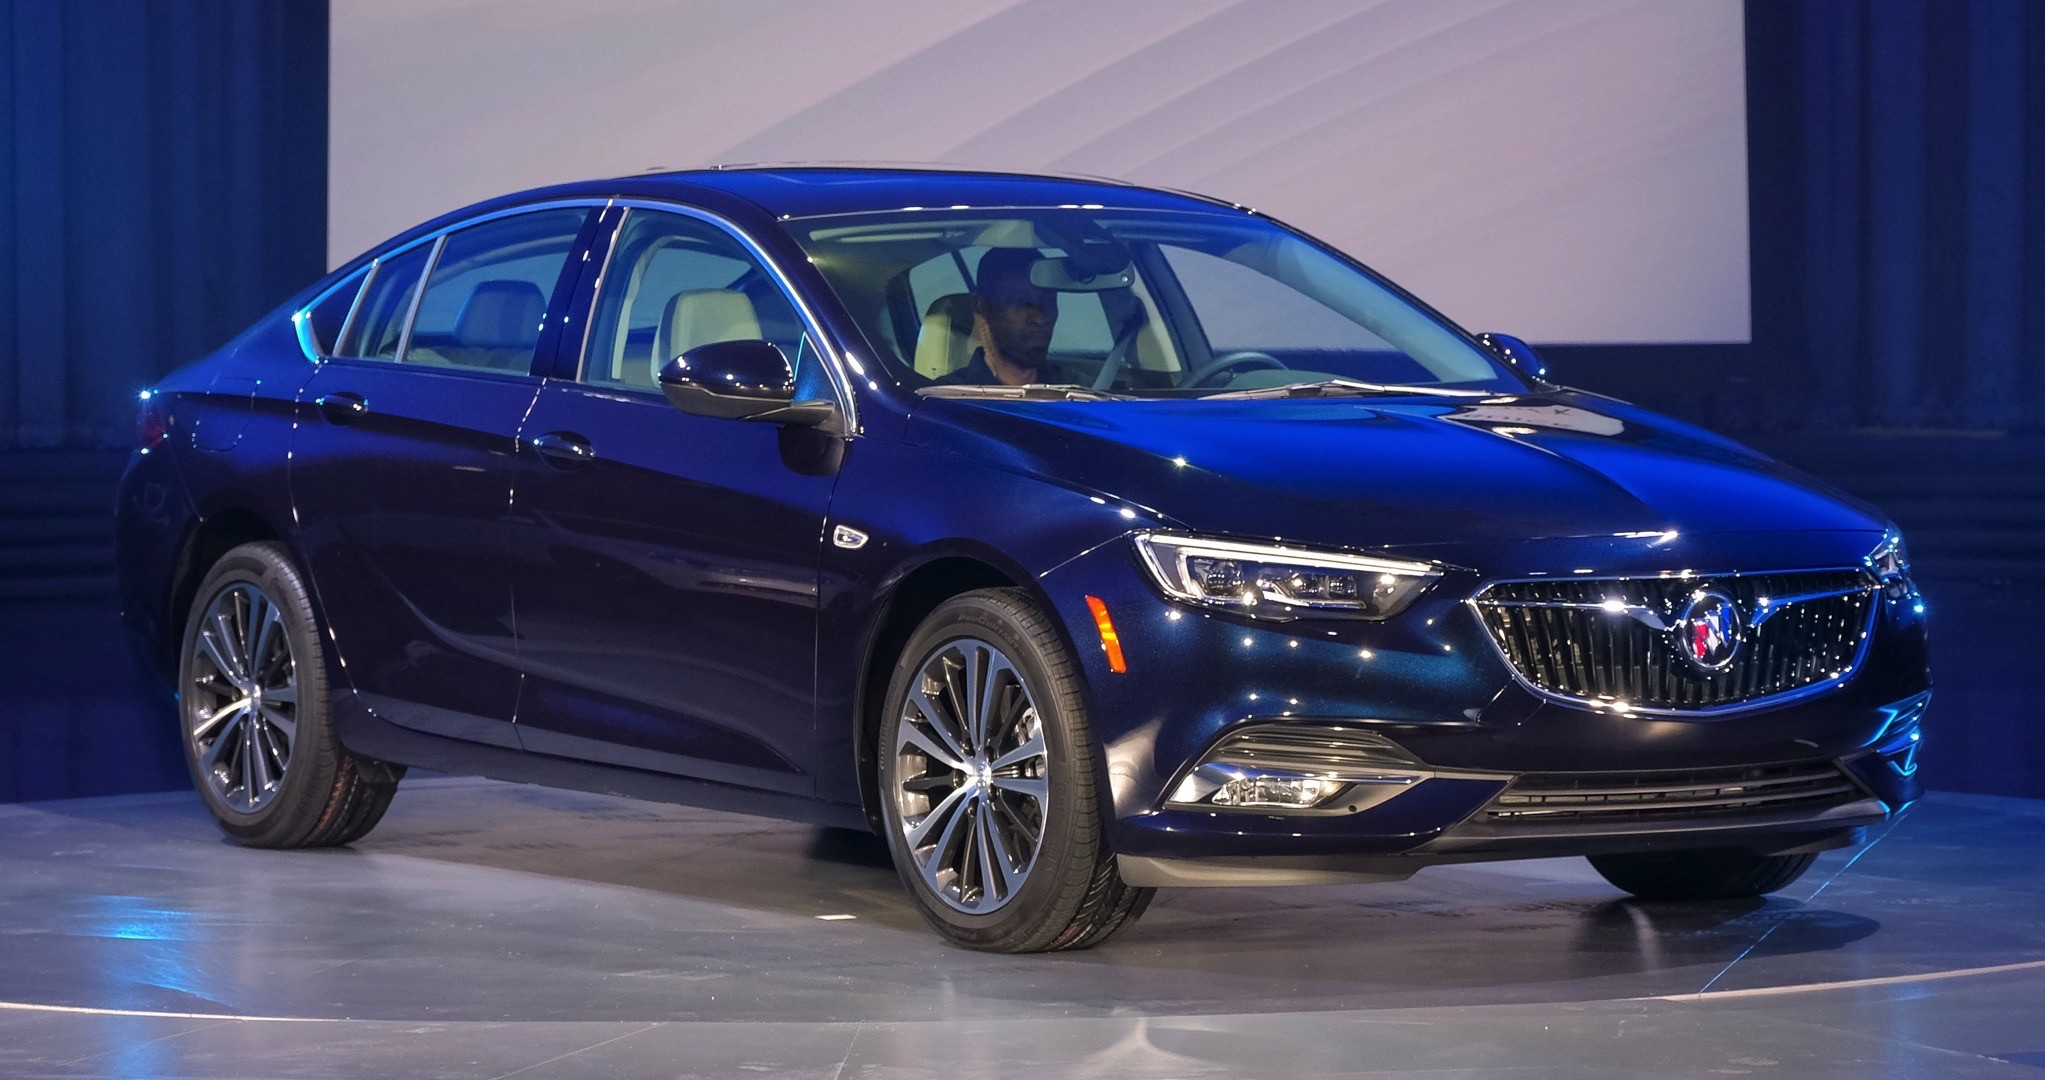 2018 Buick Regal GS Leaks In China, Has 2.0T Engine - autoevolution